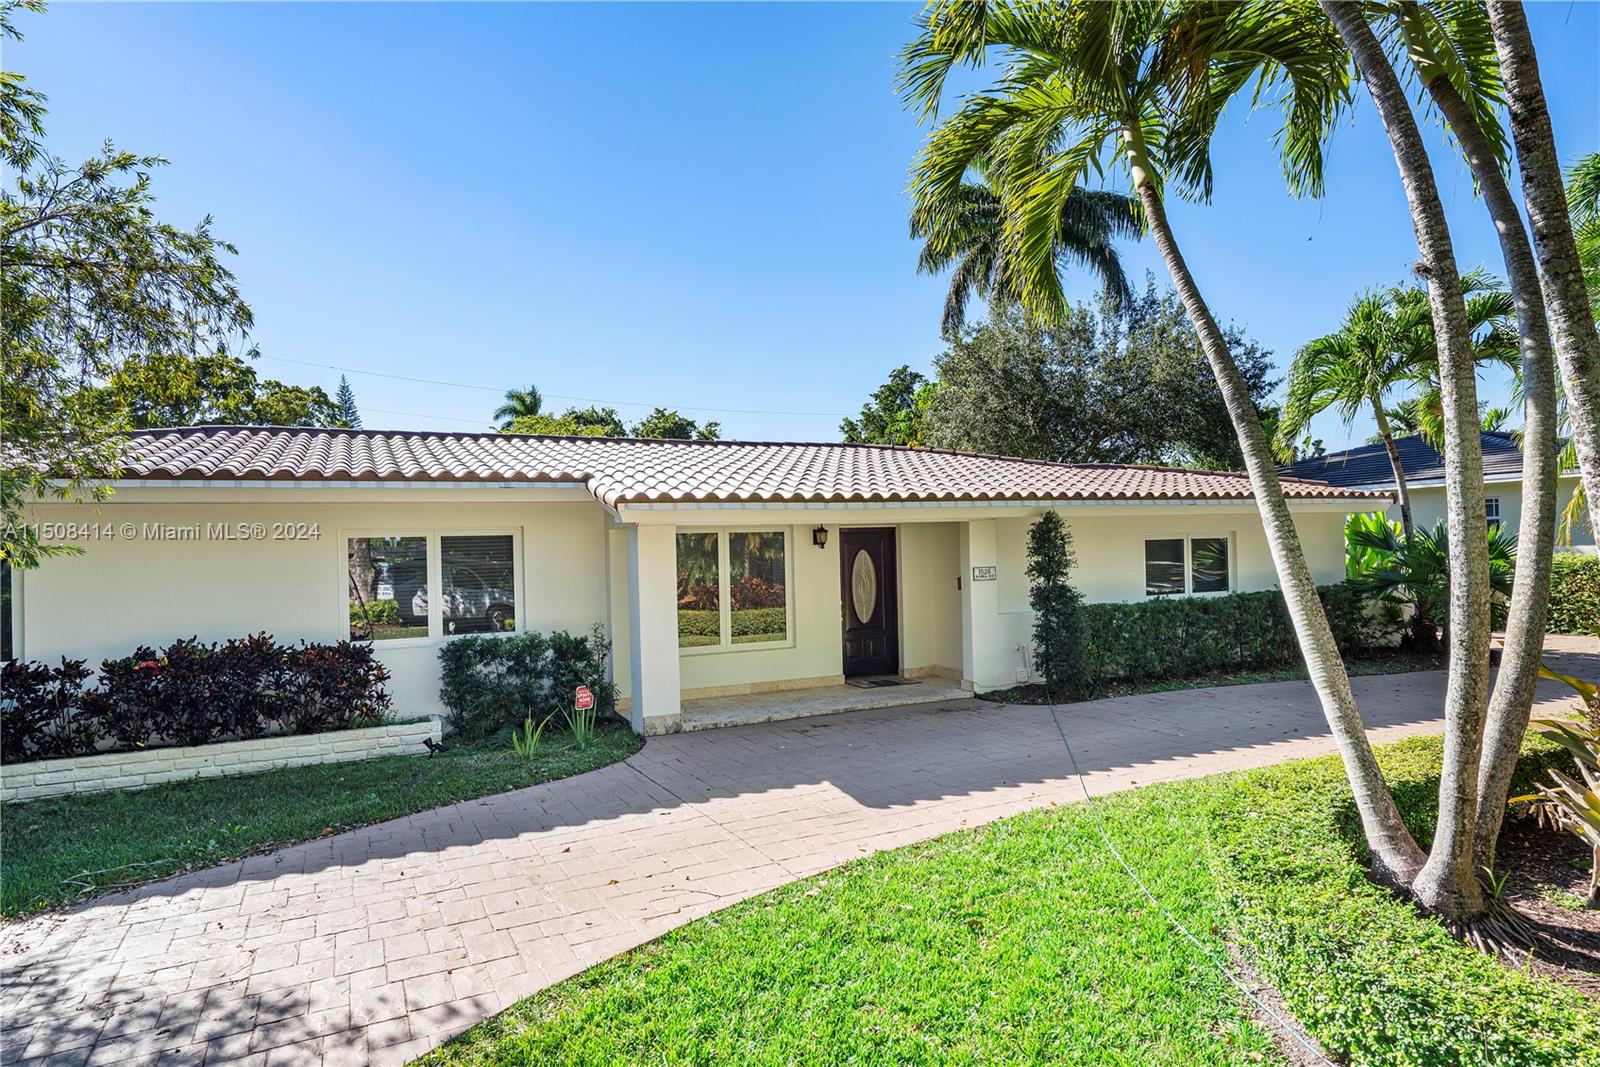 1528 Robbia Ave, Coral Gables, FL 33146